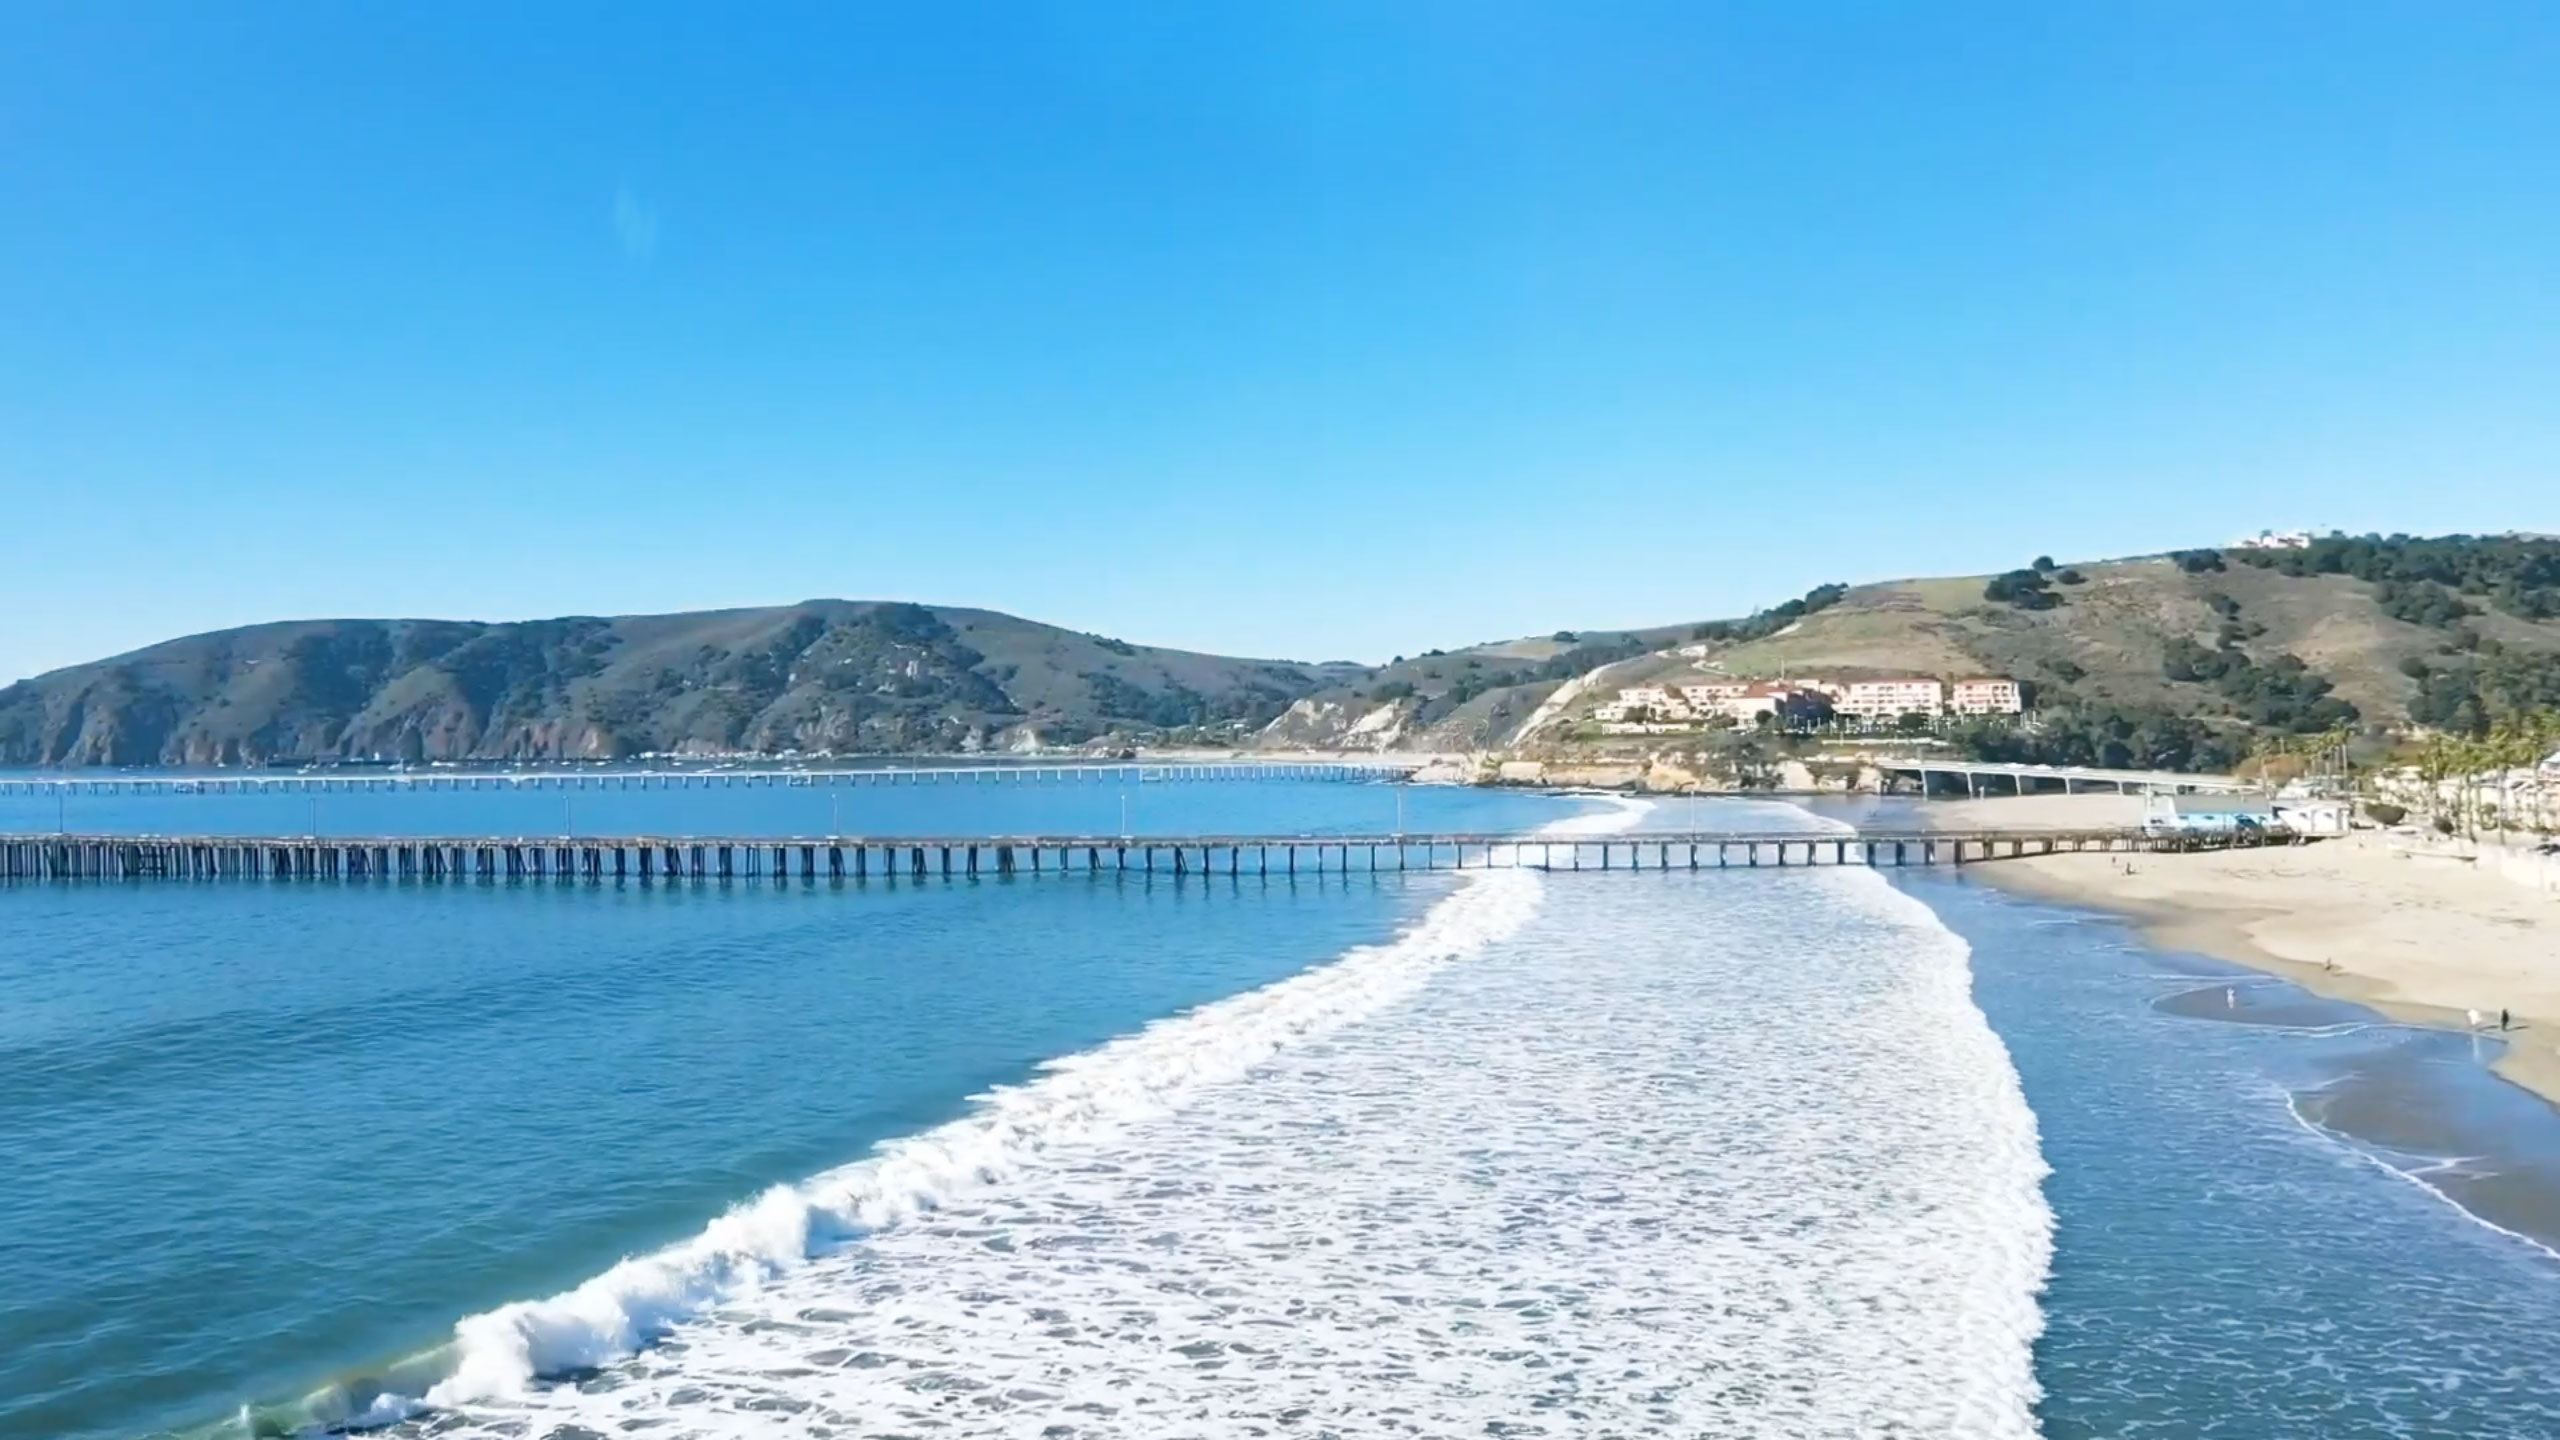 Pristine shot of a Central Coast beach, with a pier. extending from the beach to the left, past the photo into the ocean on the right, with green hills in the background and an open, blue sky